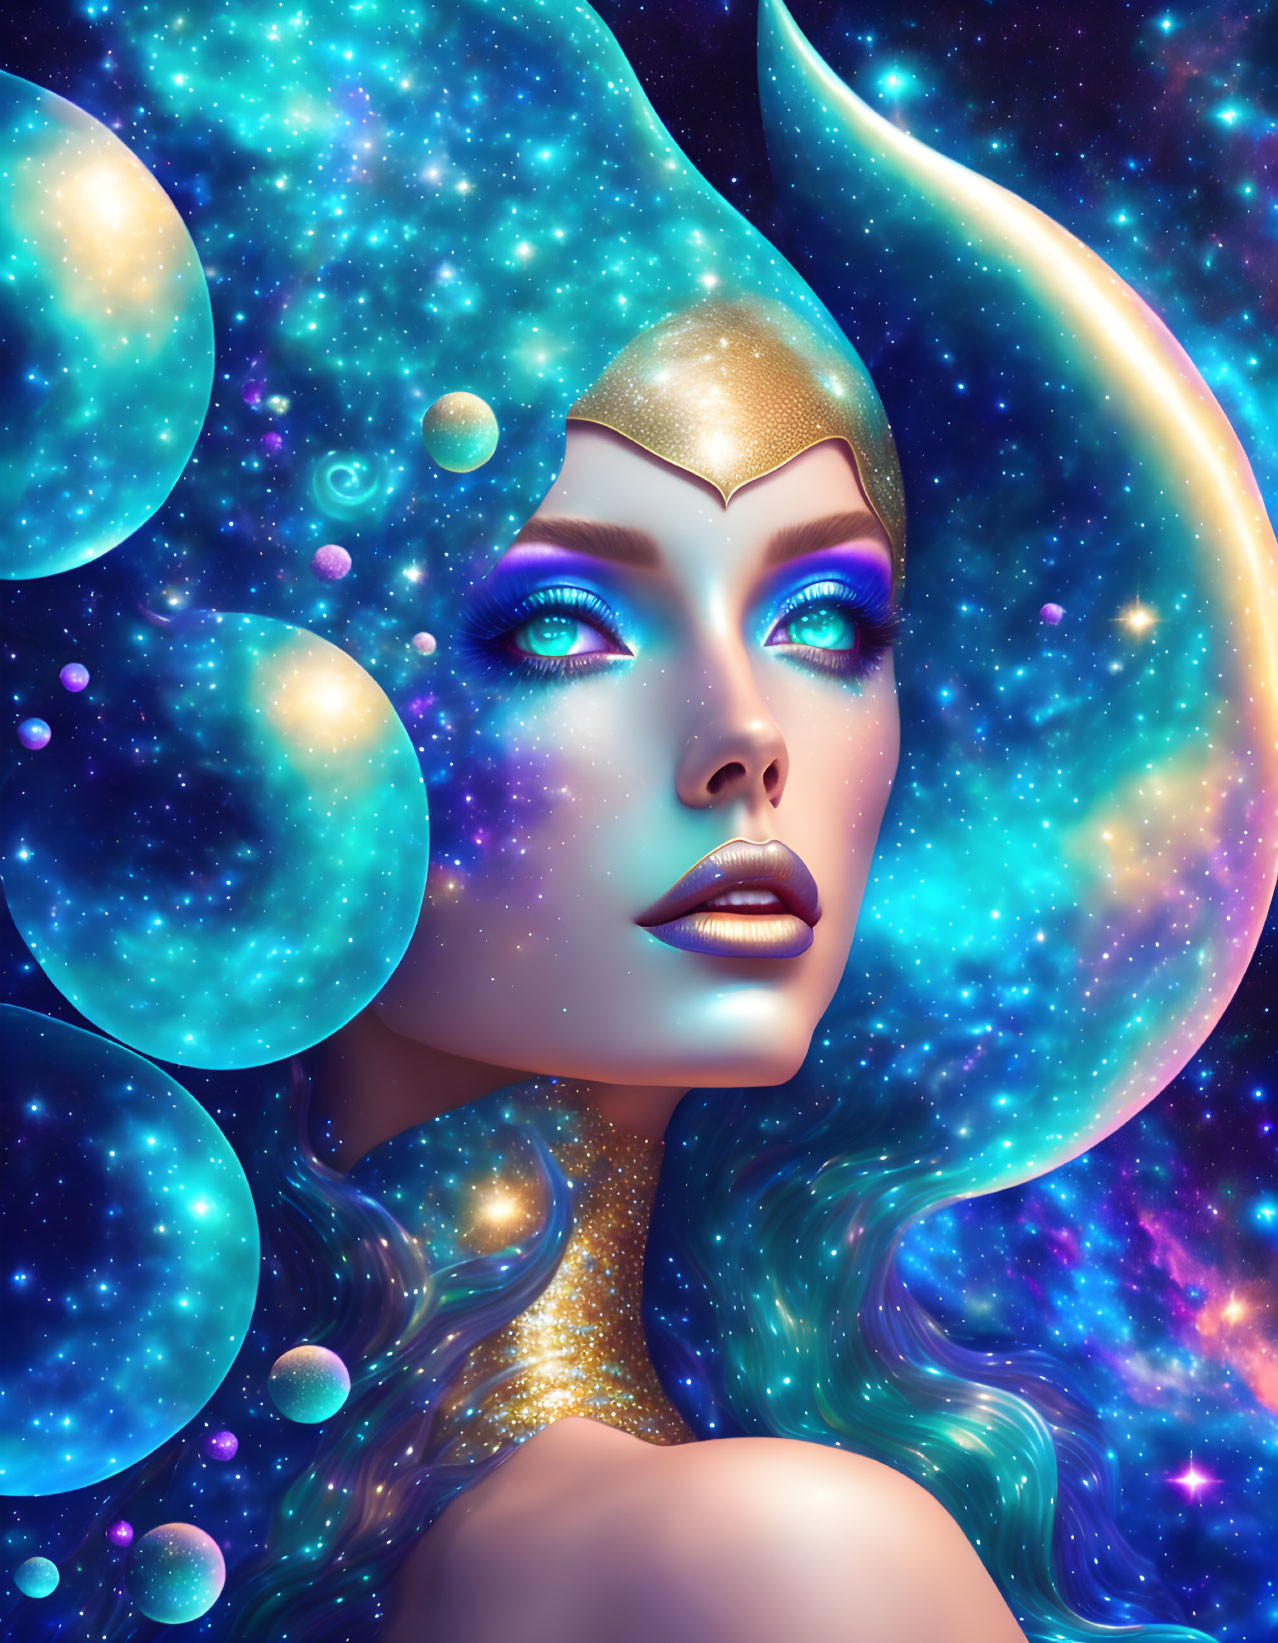 Cosmic-themed woman portrait with space makeup and headdress